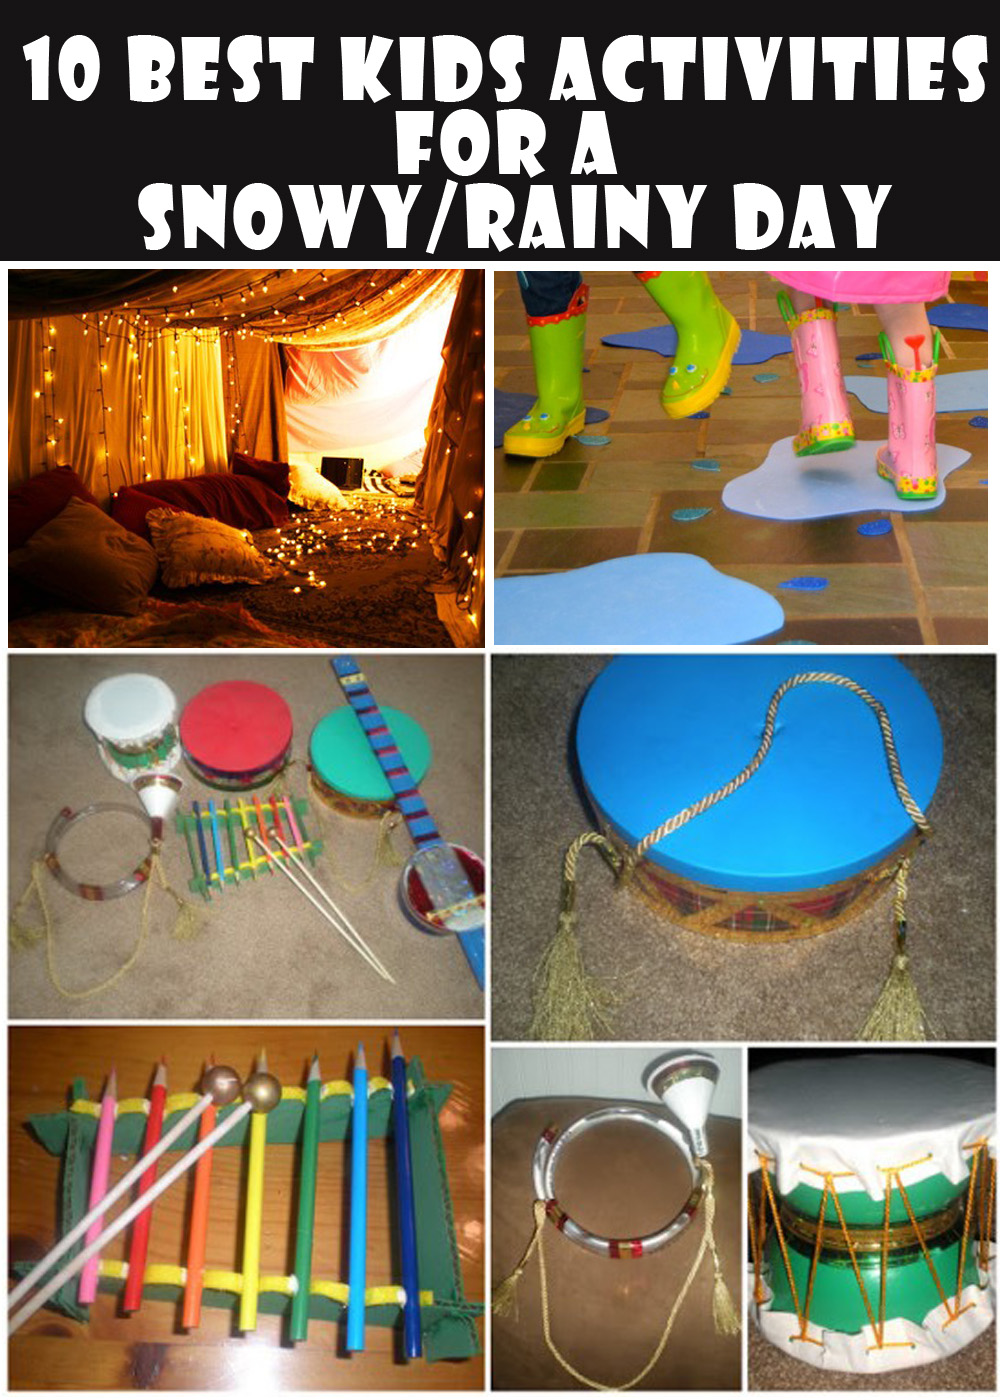 10 Awesome Indoor Activities To Do With Your Kids On A Snowy Day - Wiproo